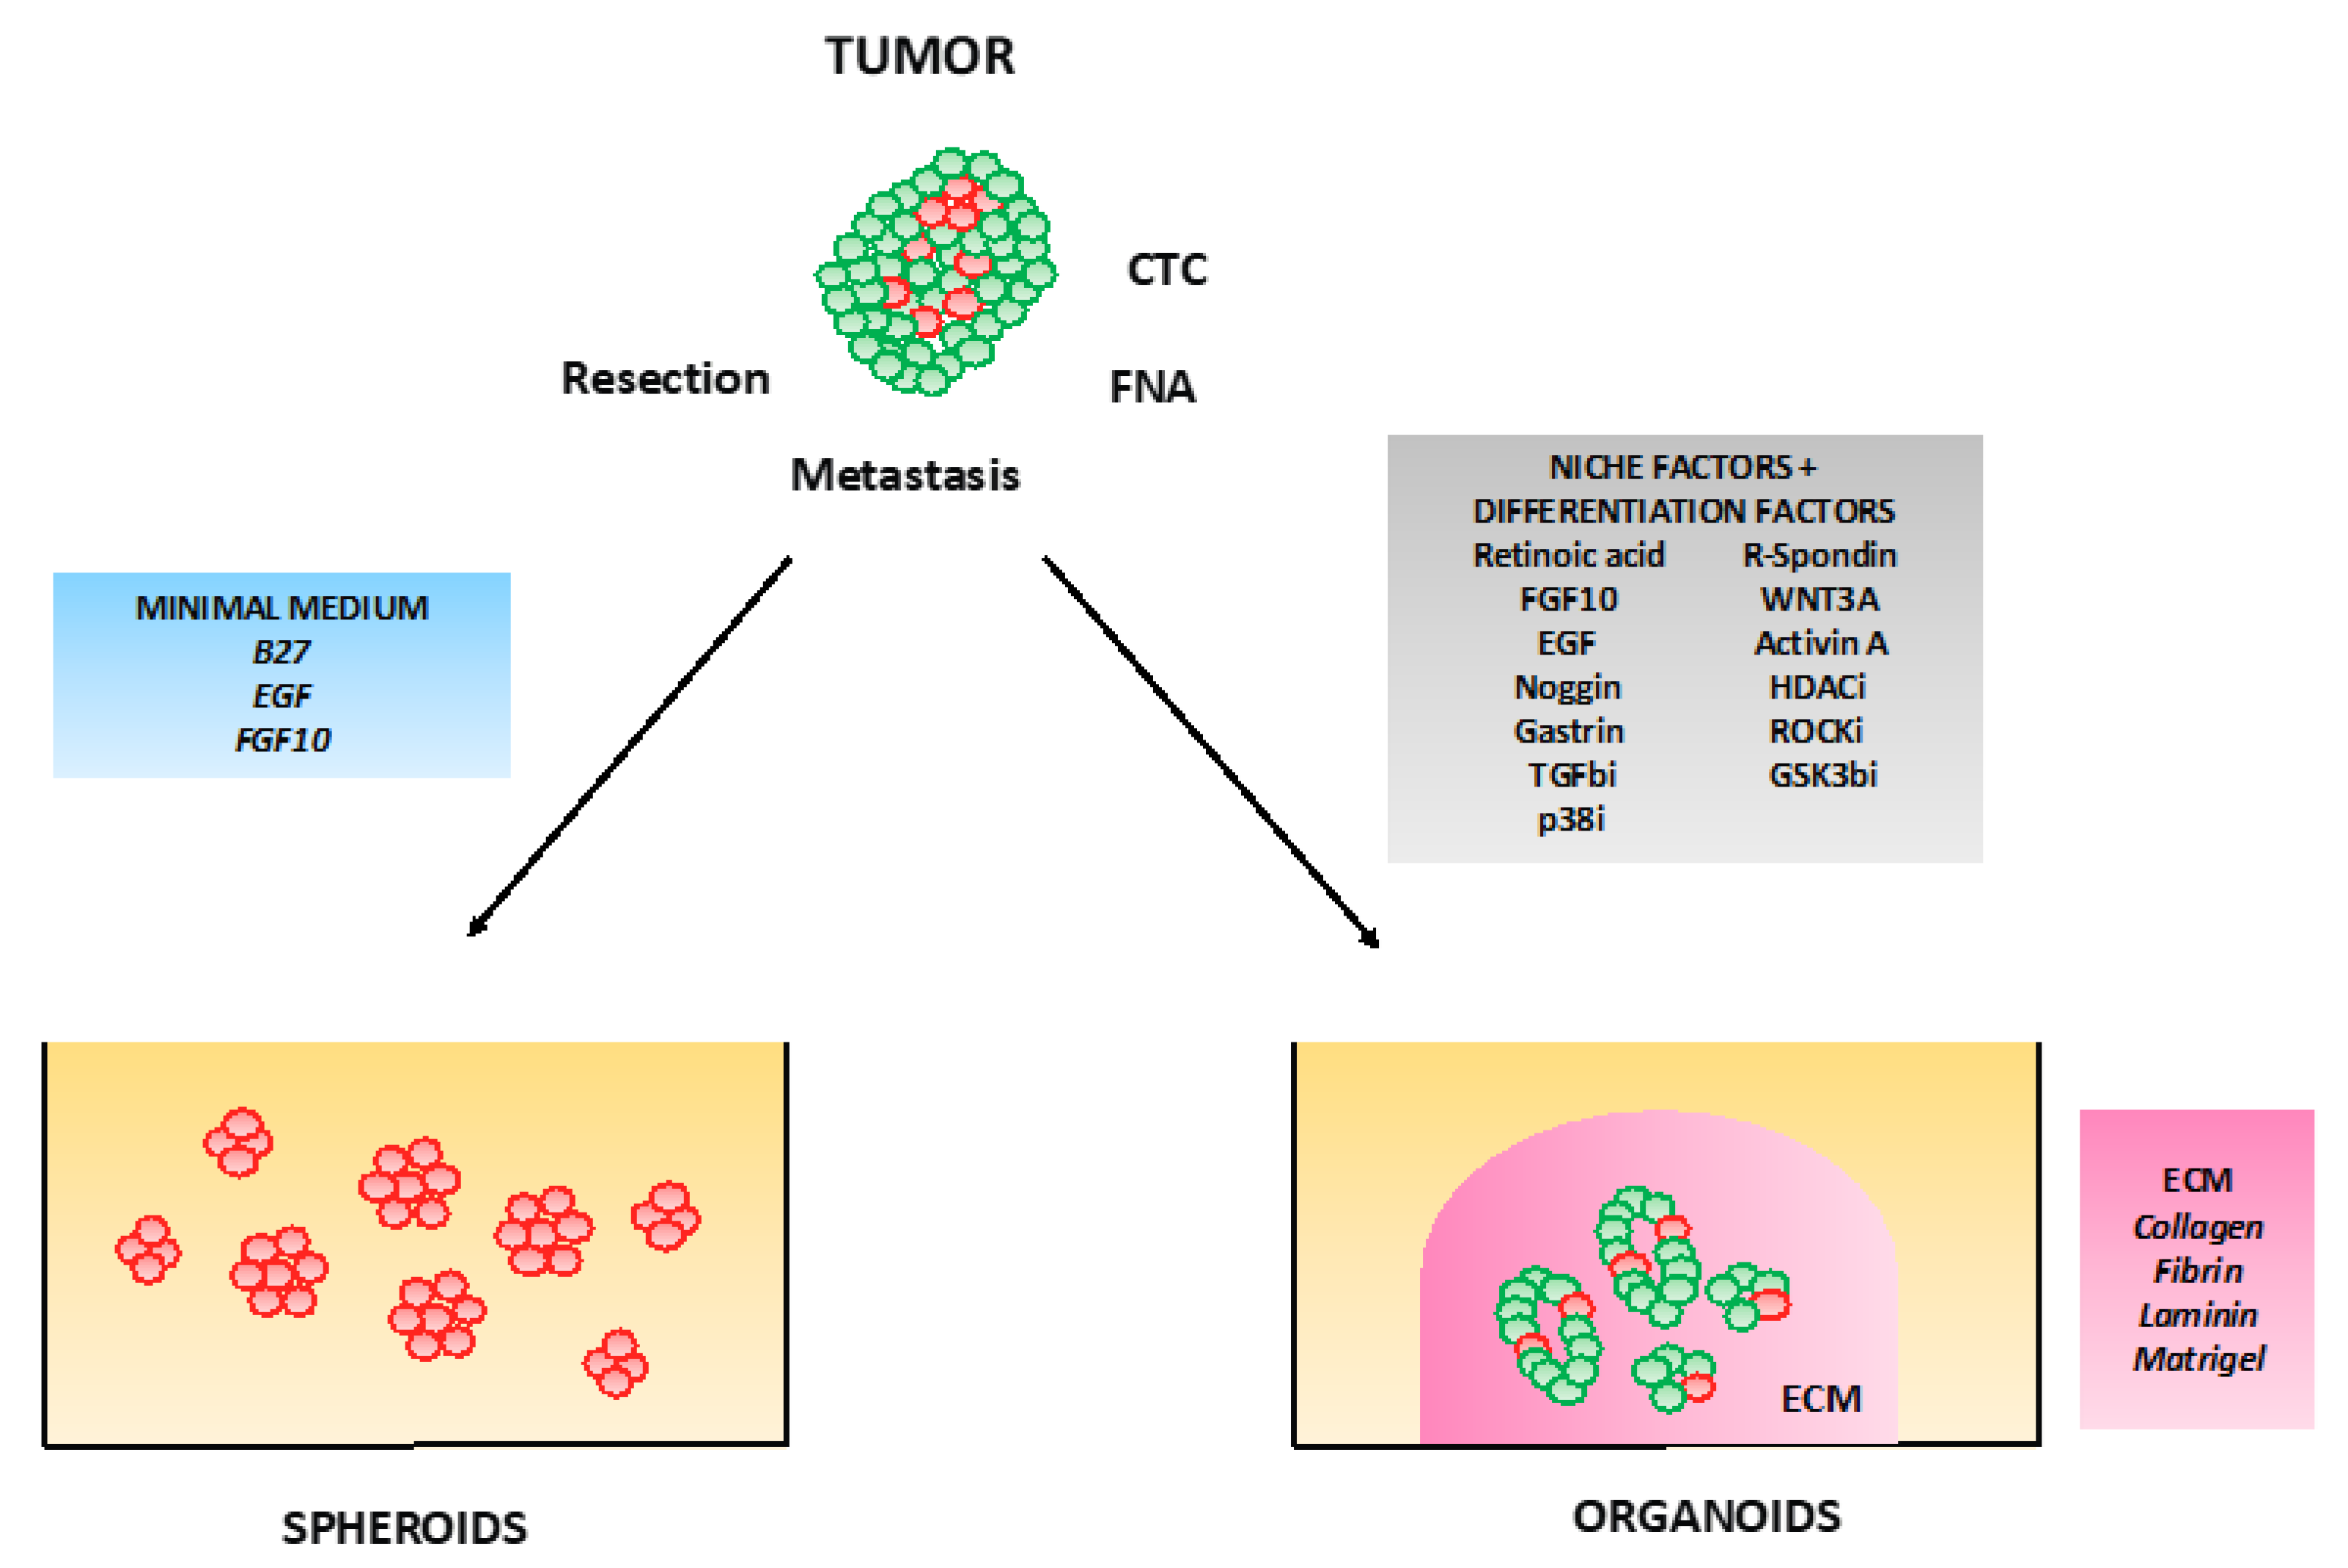 Cancers Free Full Text Pancreatic Ductal Adenocarcinoma Pdac Organoids The Shining Light At The End Of The Tunnel For Drug Response Prediction And Personalized Medicine